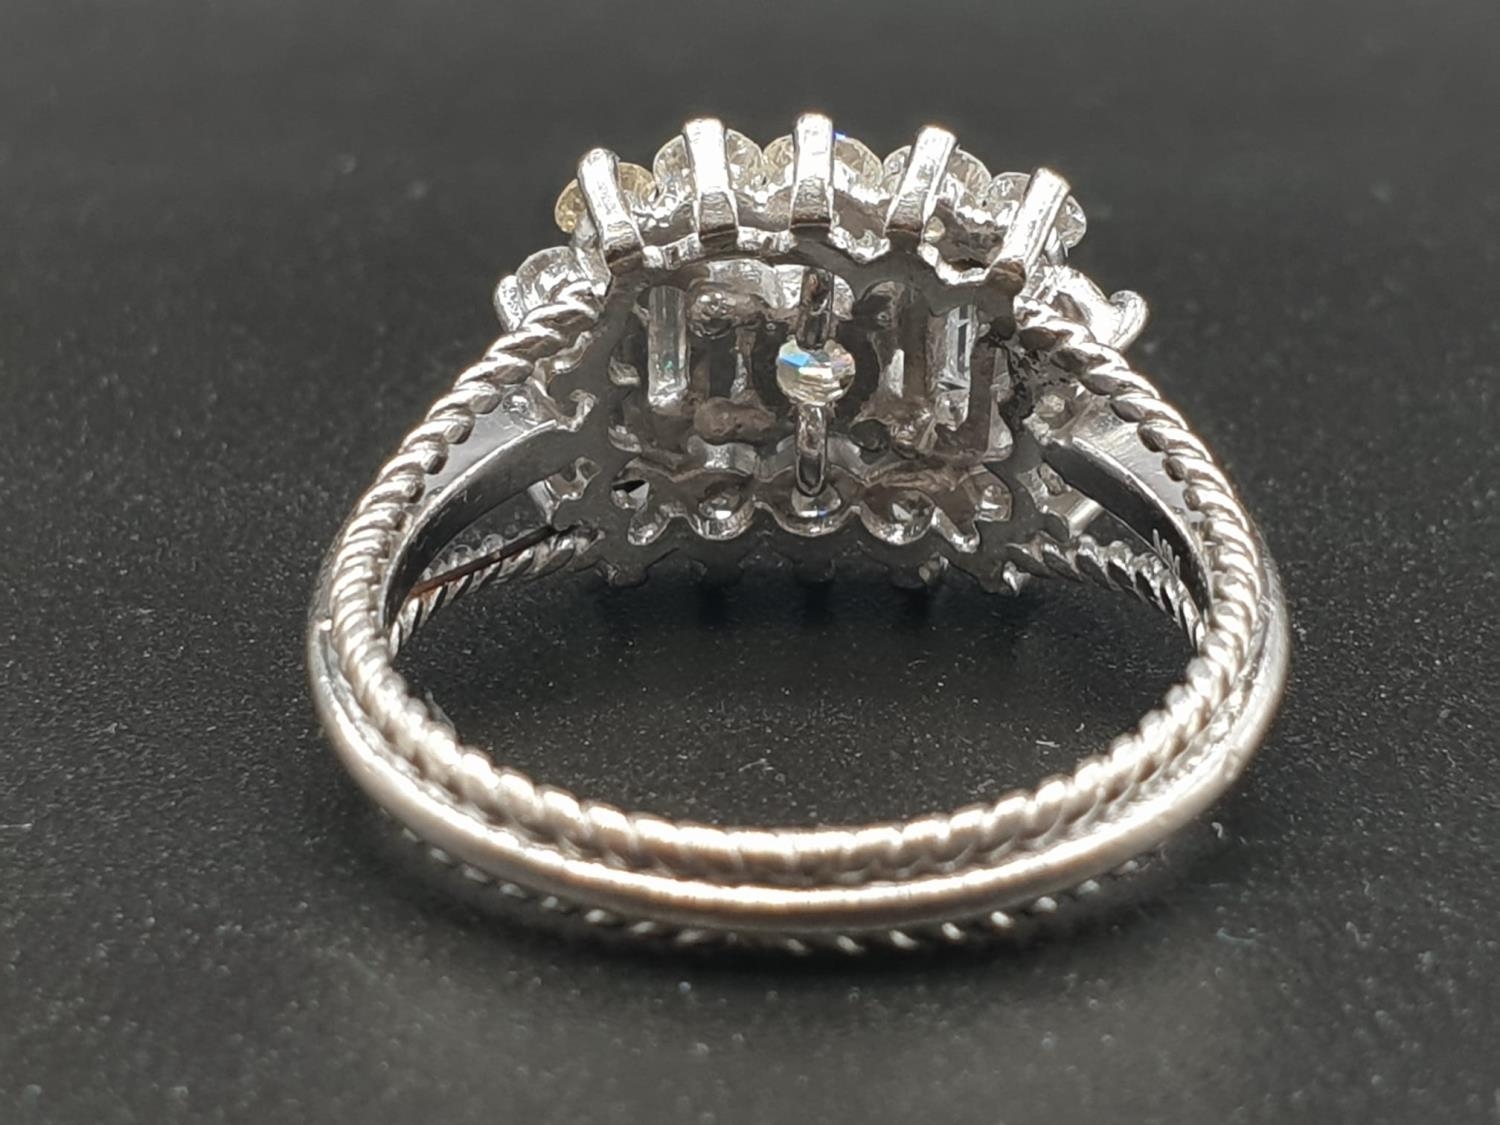 An 18 K (hallmarked) white gold ring with baguettes and brilliant cut diamonds. Ring size: O, - Image 4 of 6